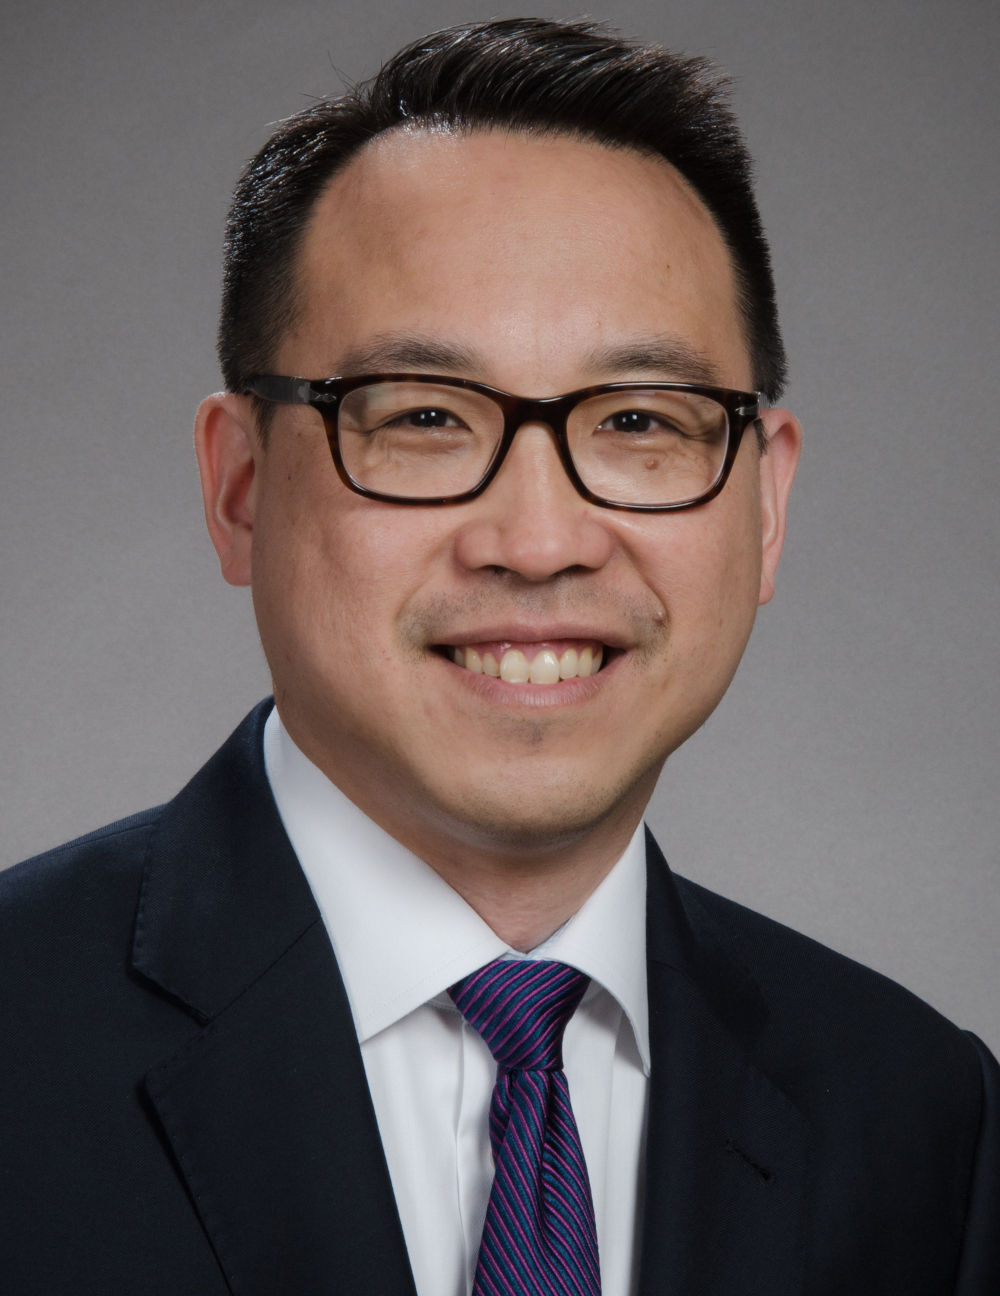 Thomas Chung is a fellow in the Department of Otolaryngology and Communication Enhancement.